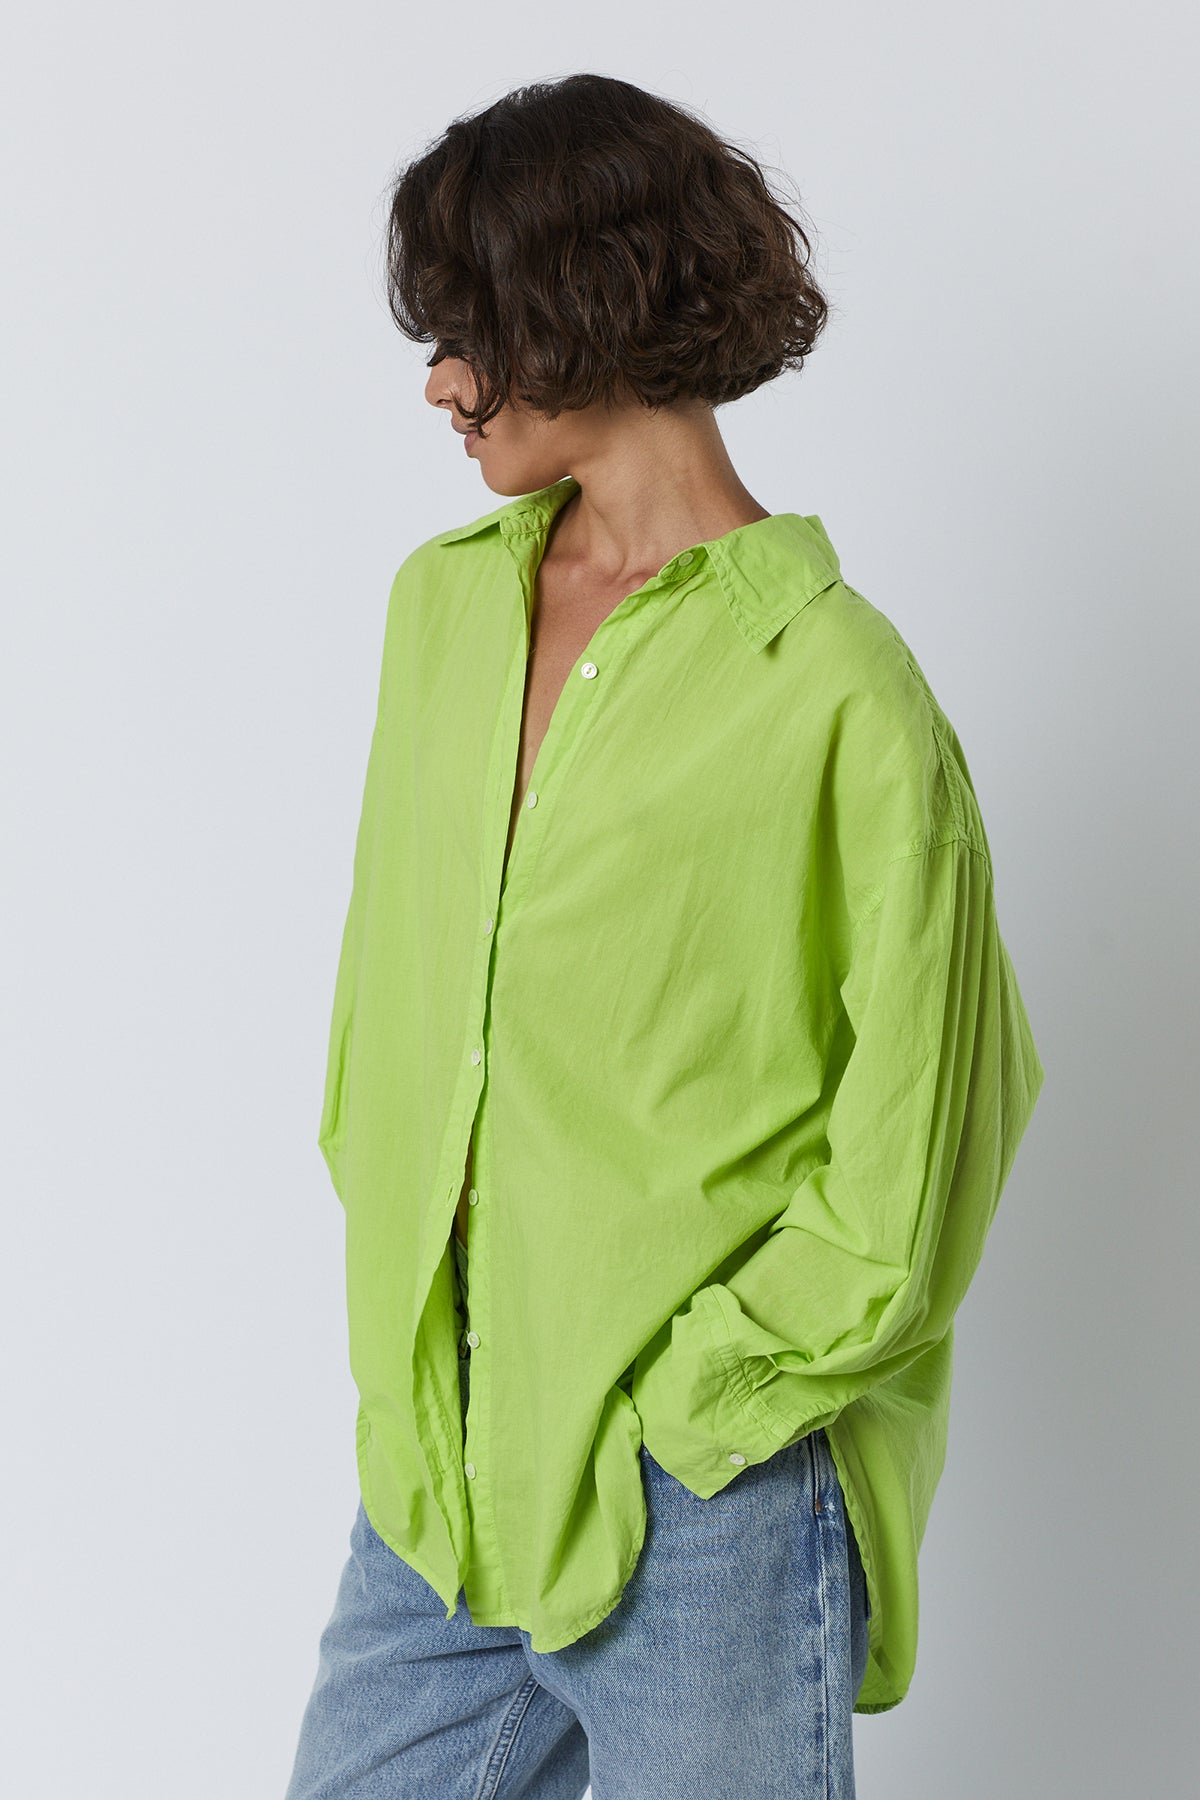 Redondo Button-Up Shirt in acid green with blue denim front & side-26007189258433